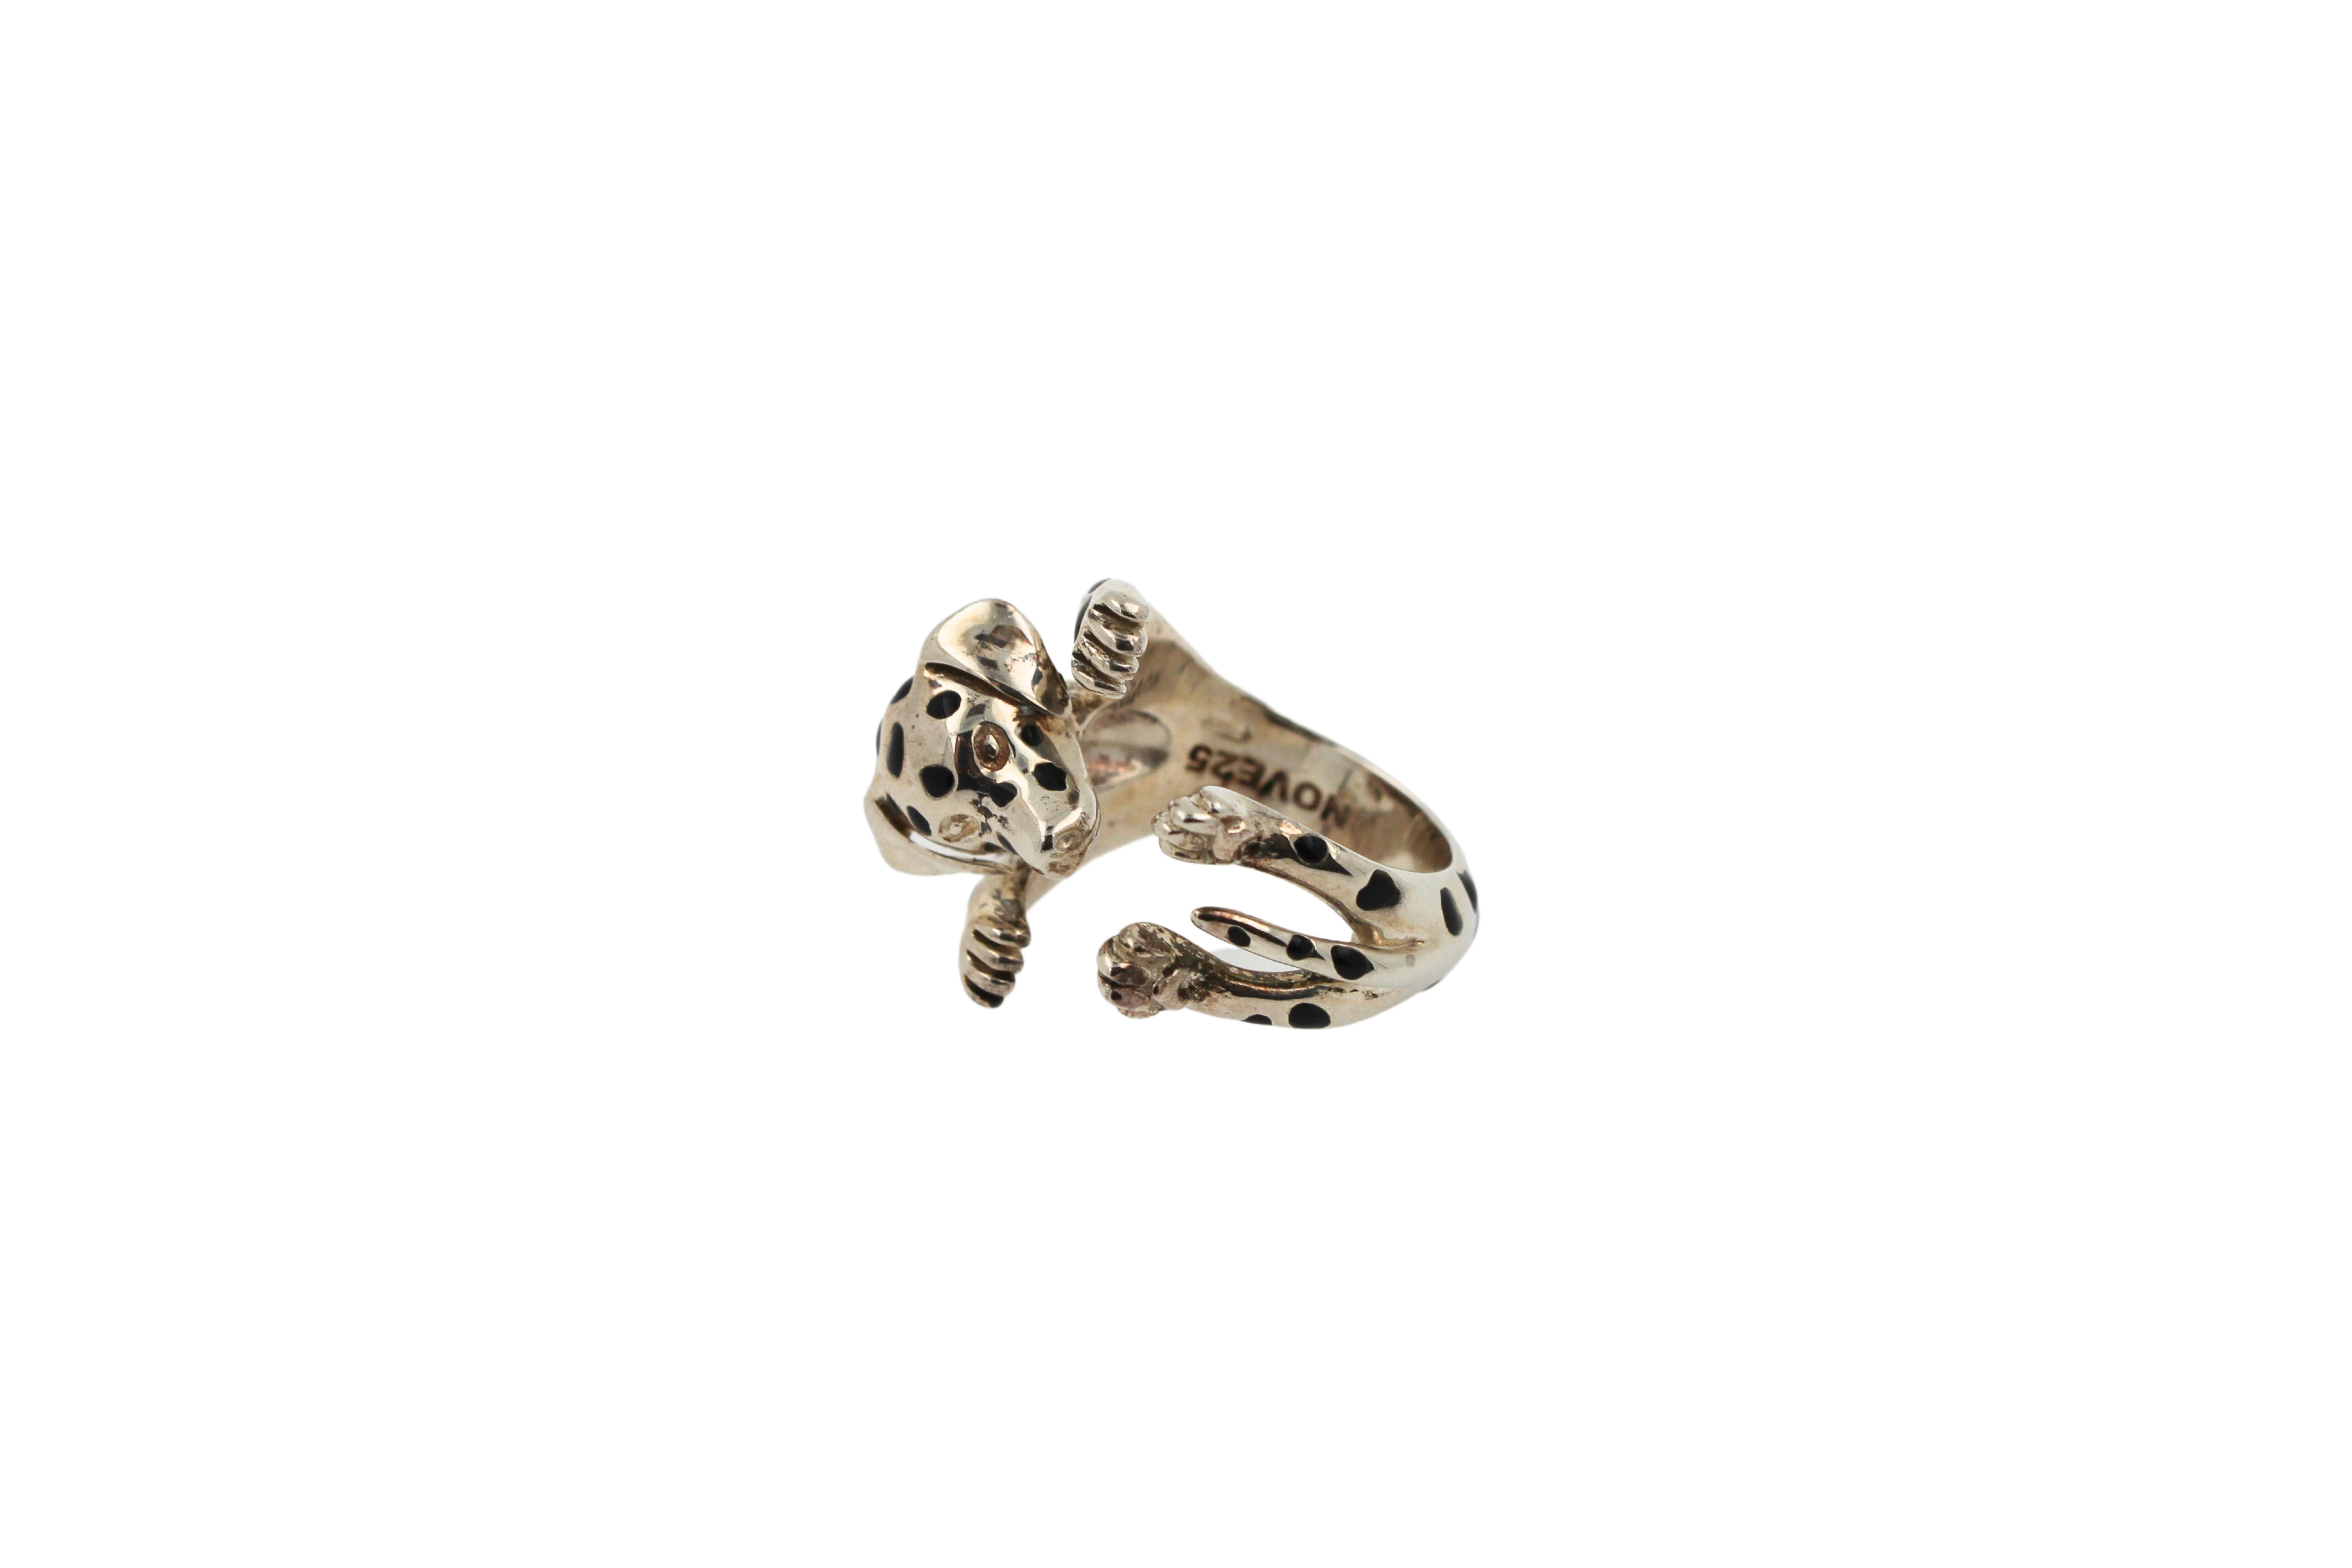 925 Sterling Silver Dog Puppy Animal Cute Dalmatian Unique Statement Hug Ring
-Dog Fever sterling silver Hug ring faithfully portrays the iconic dog breed.
-Cute, fun and versatile
-925 Sterling Silver
-Entirely designed and handcrafted in